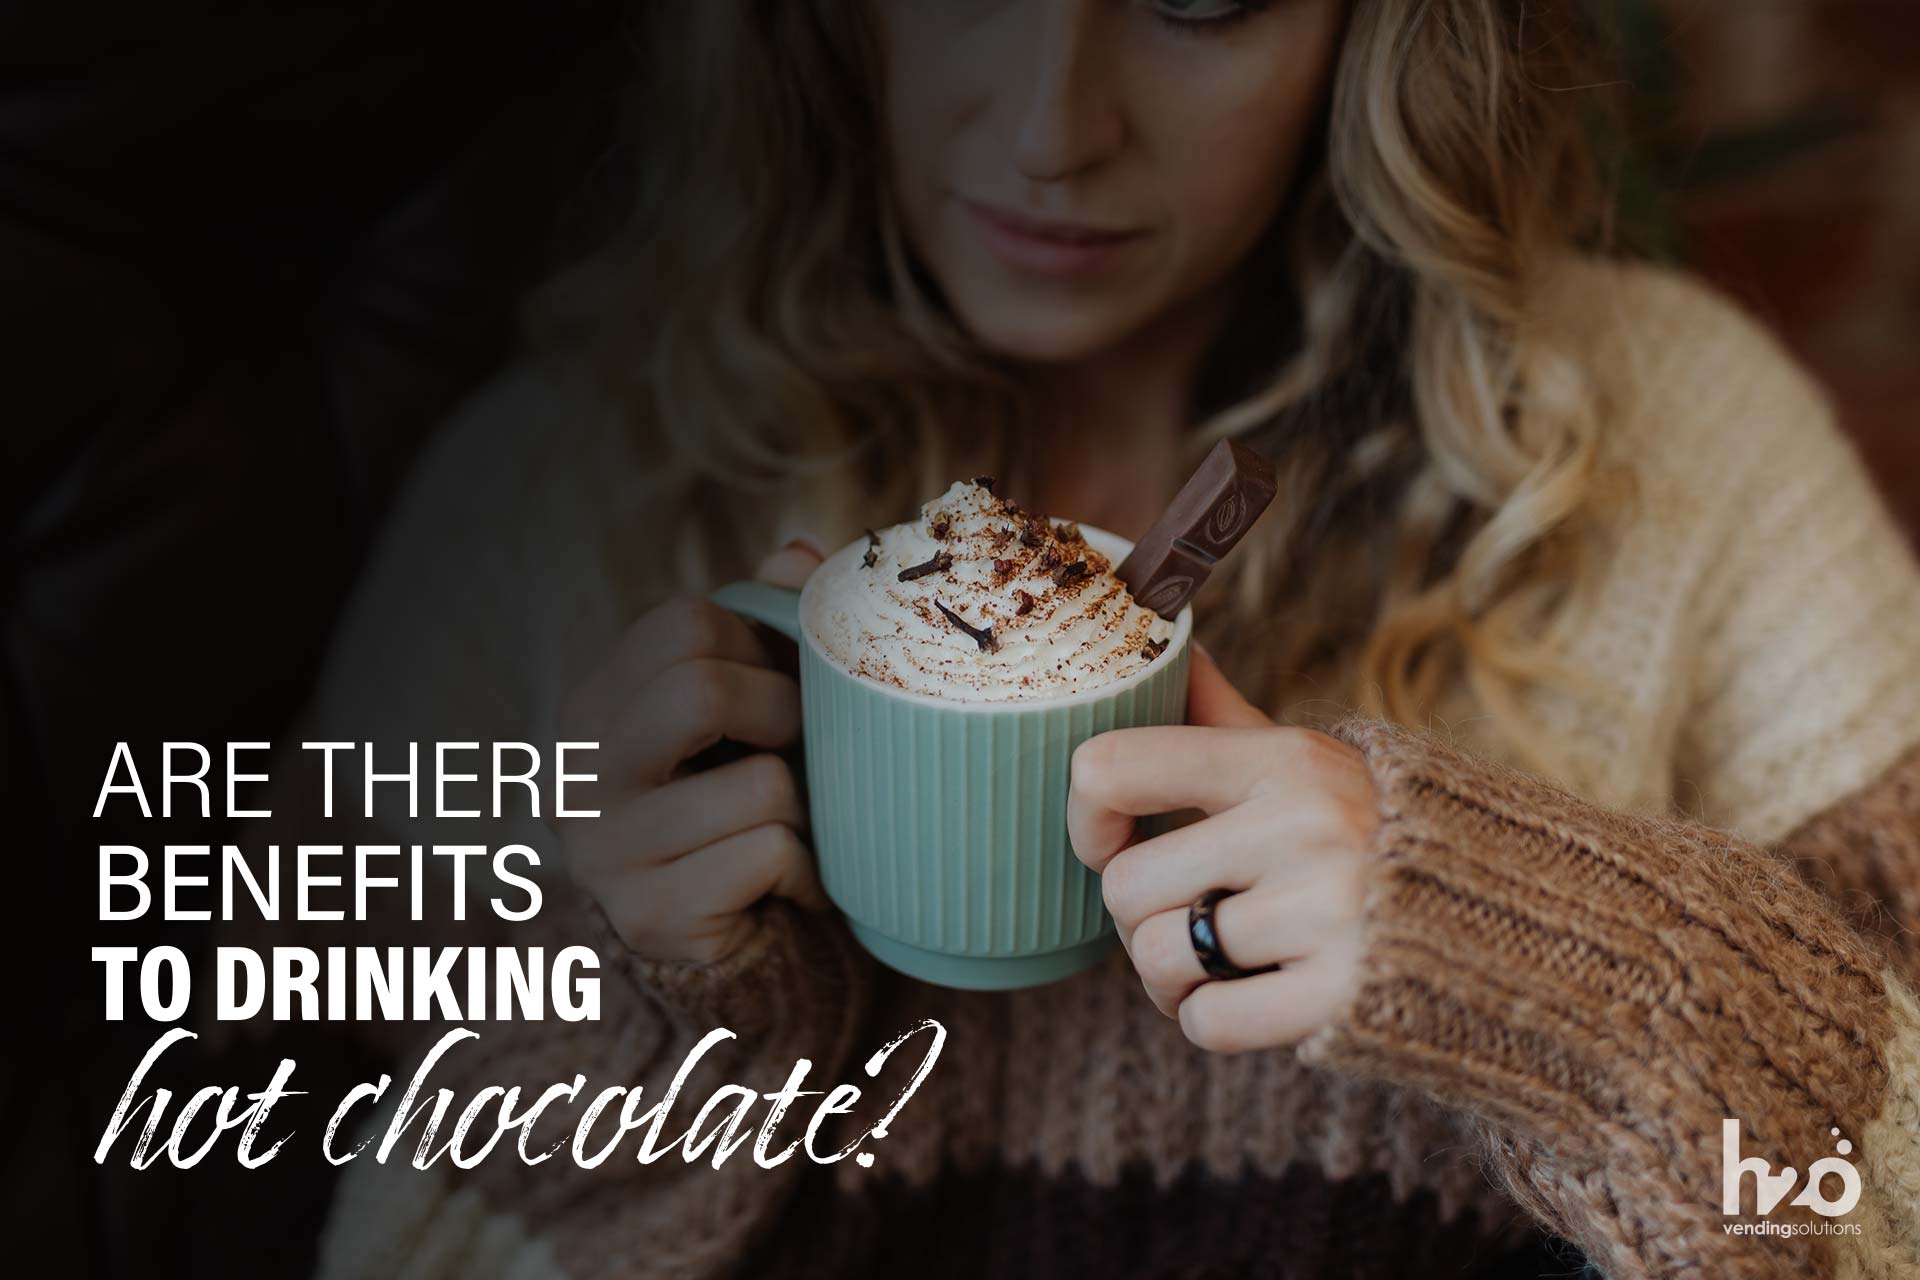 Are there benefits to drinking hot chocolate?